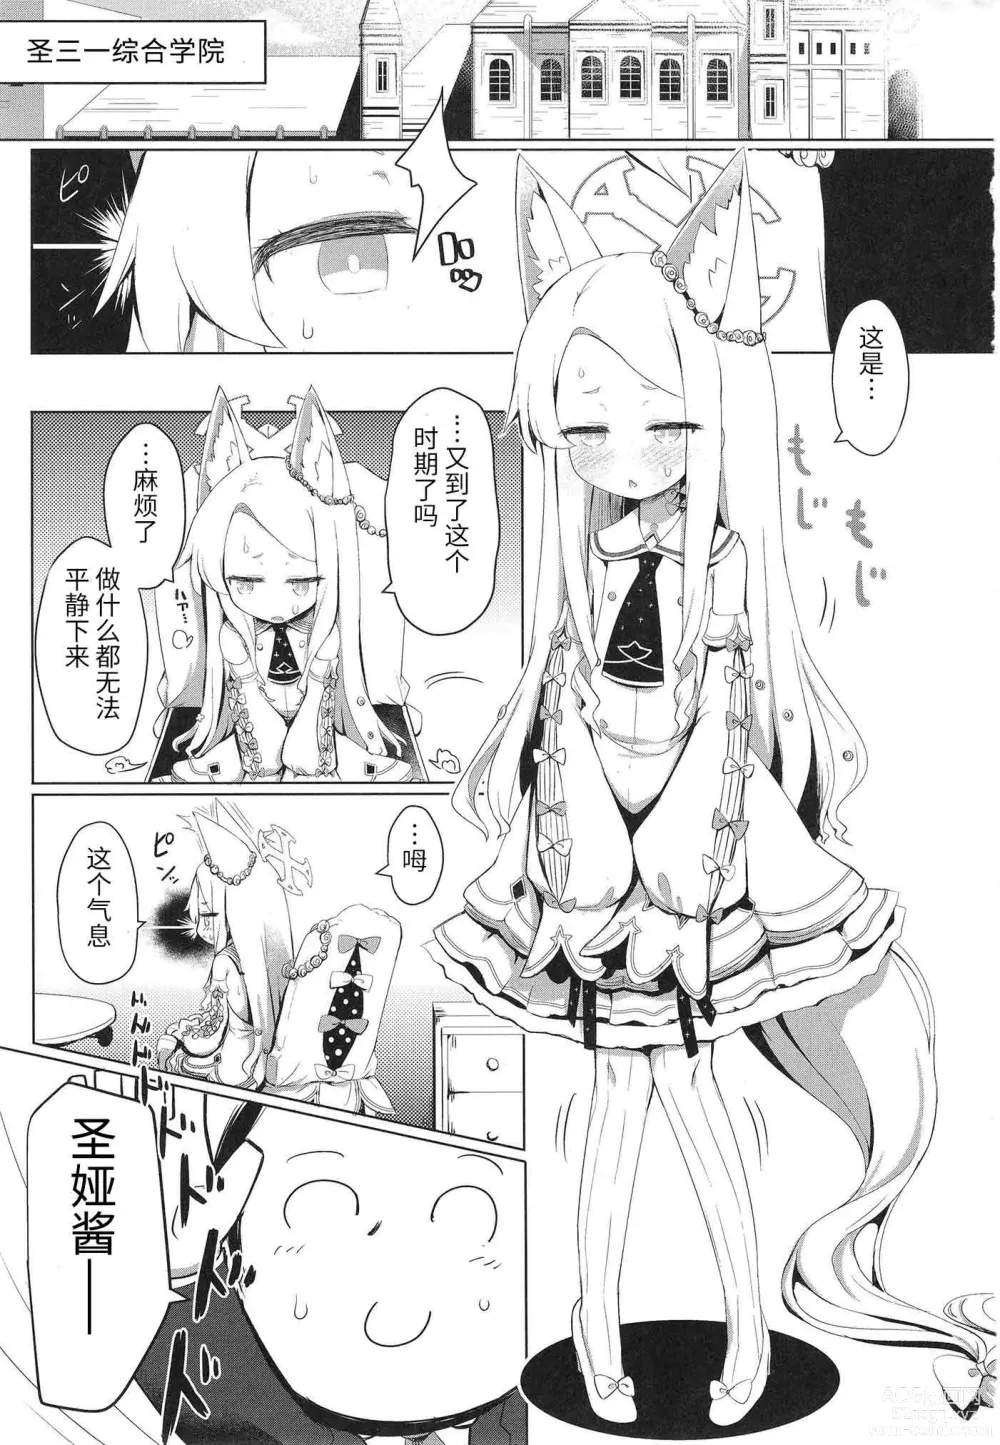 Page 3 of doujinshi 抱歉的发情圣娅